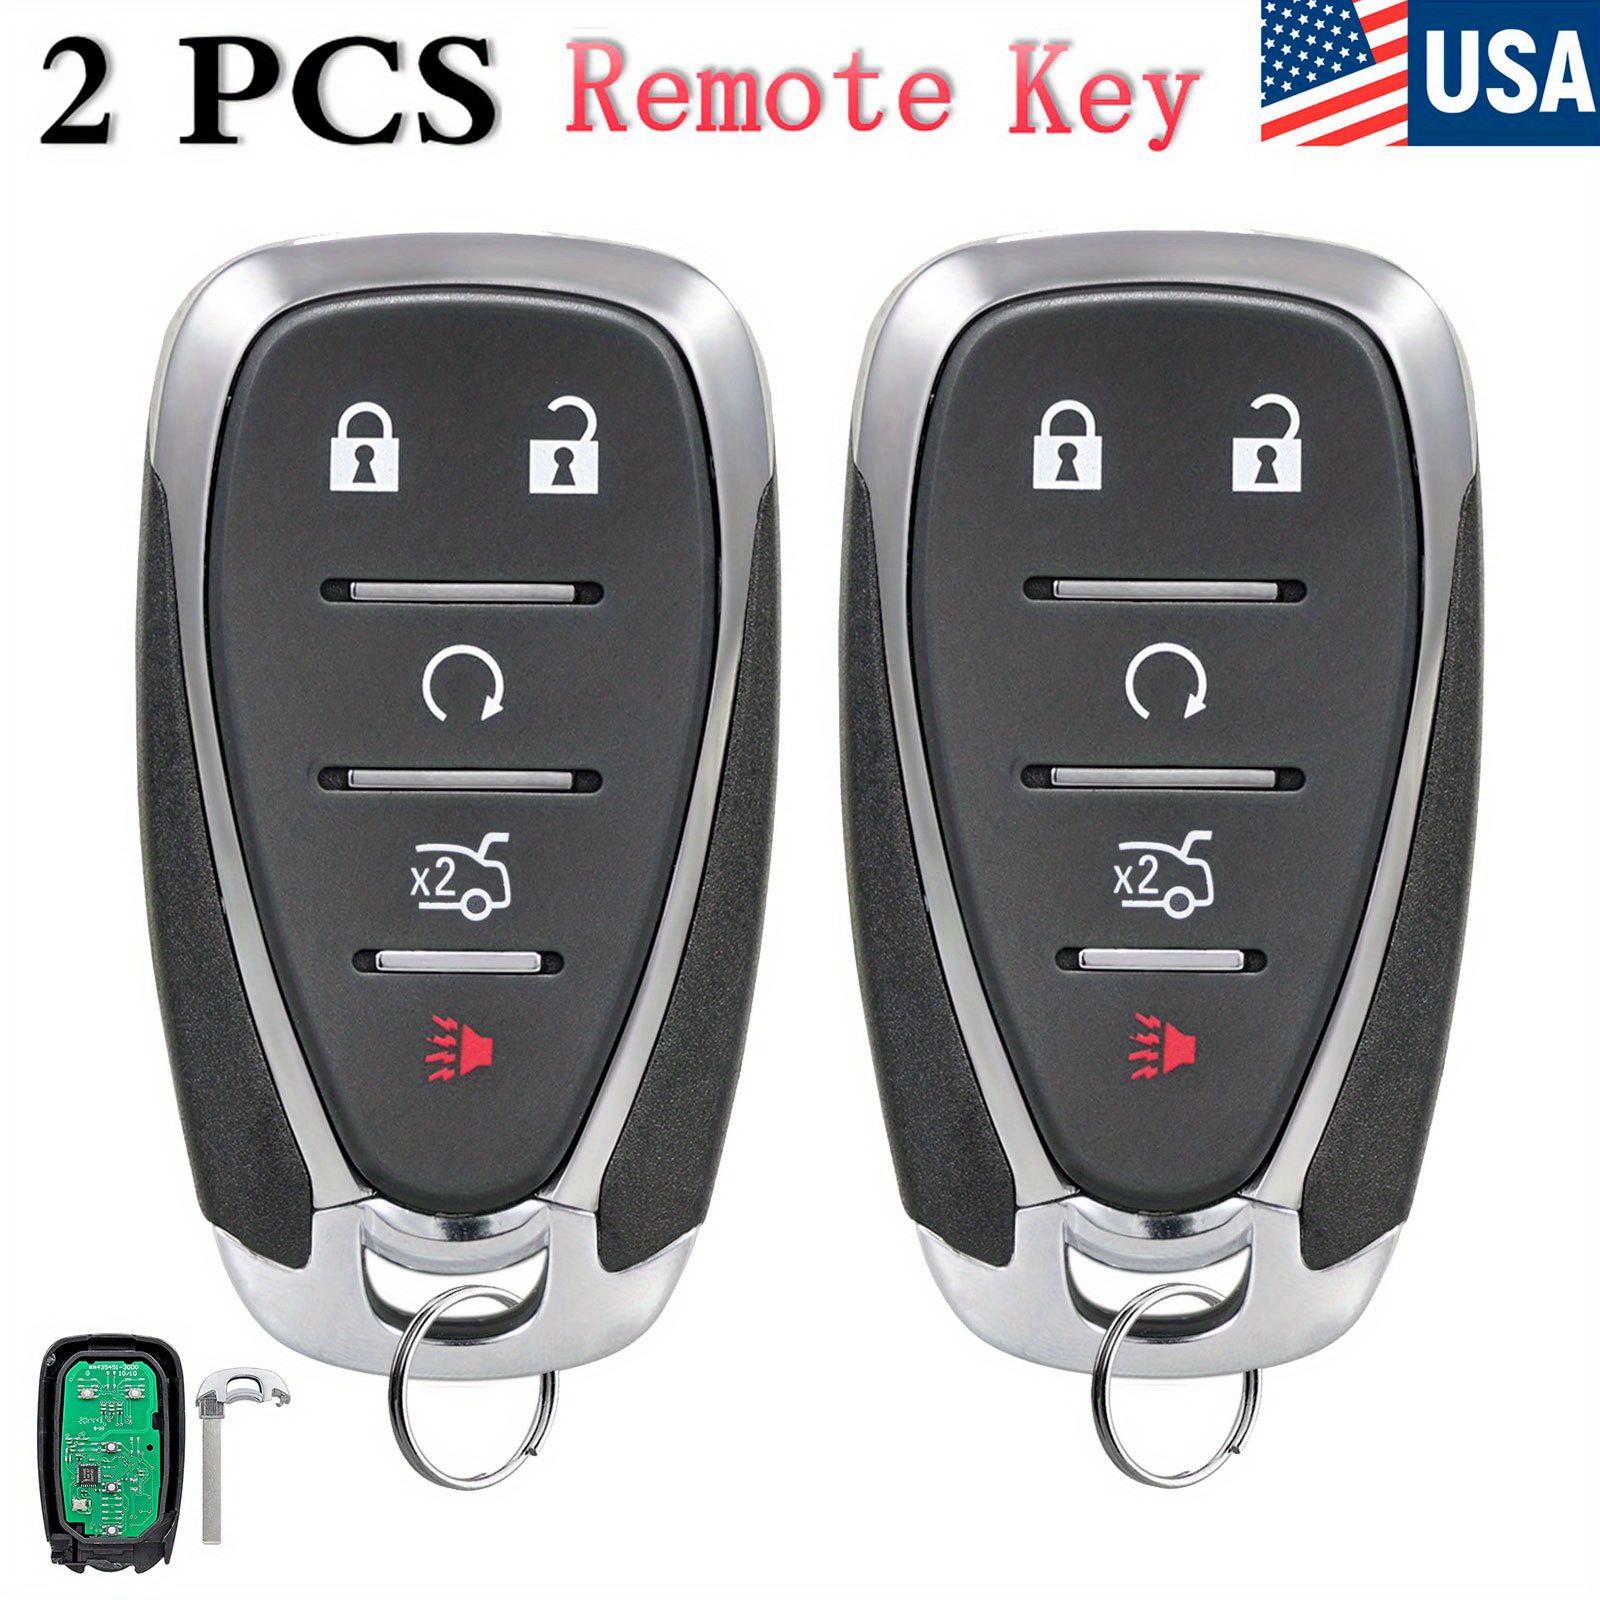 

2pcs 433mhz Remote Car Key Fob 5 Buttons For Chevrolet For Camaro For Cruze For Malibu Fit Fcc Id Hyq4ea